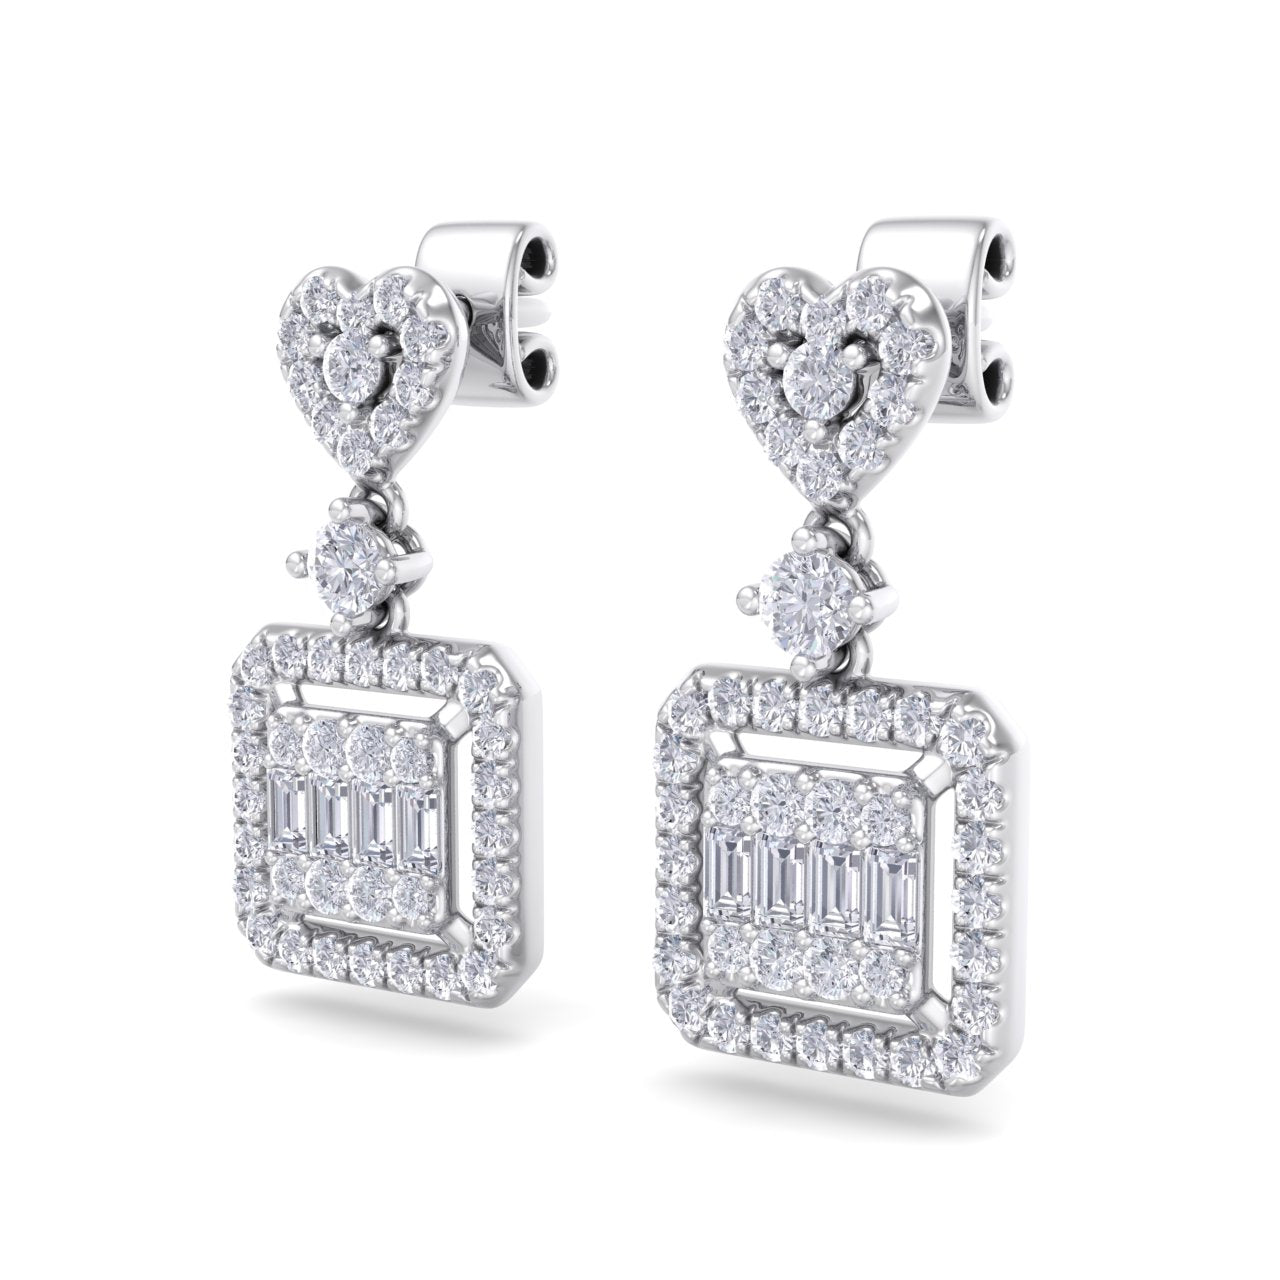 Square drop heart earrings in yellow gold with white diamonds of 0.65 ct in weight